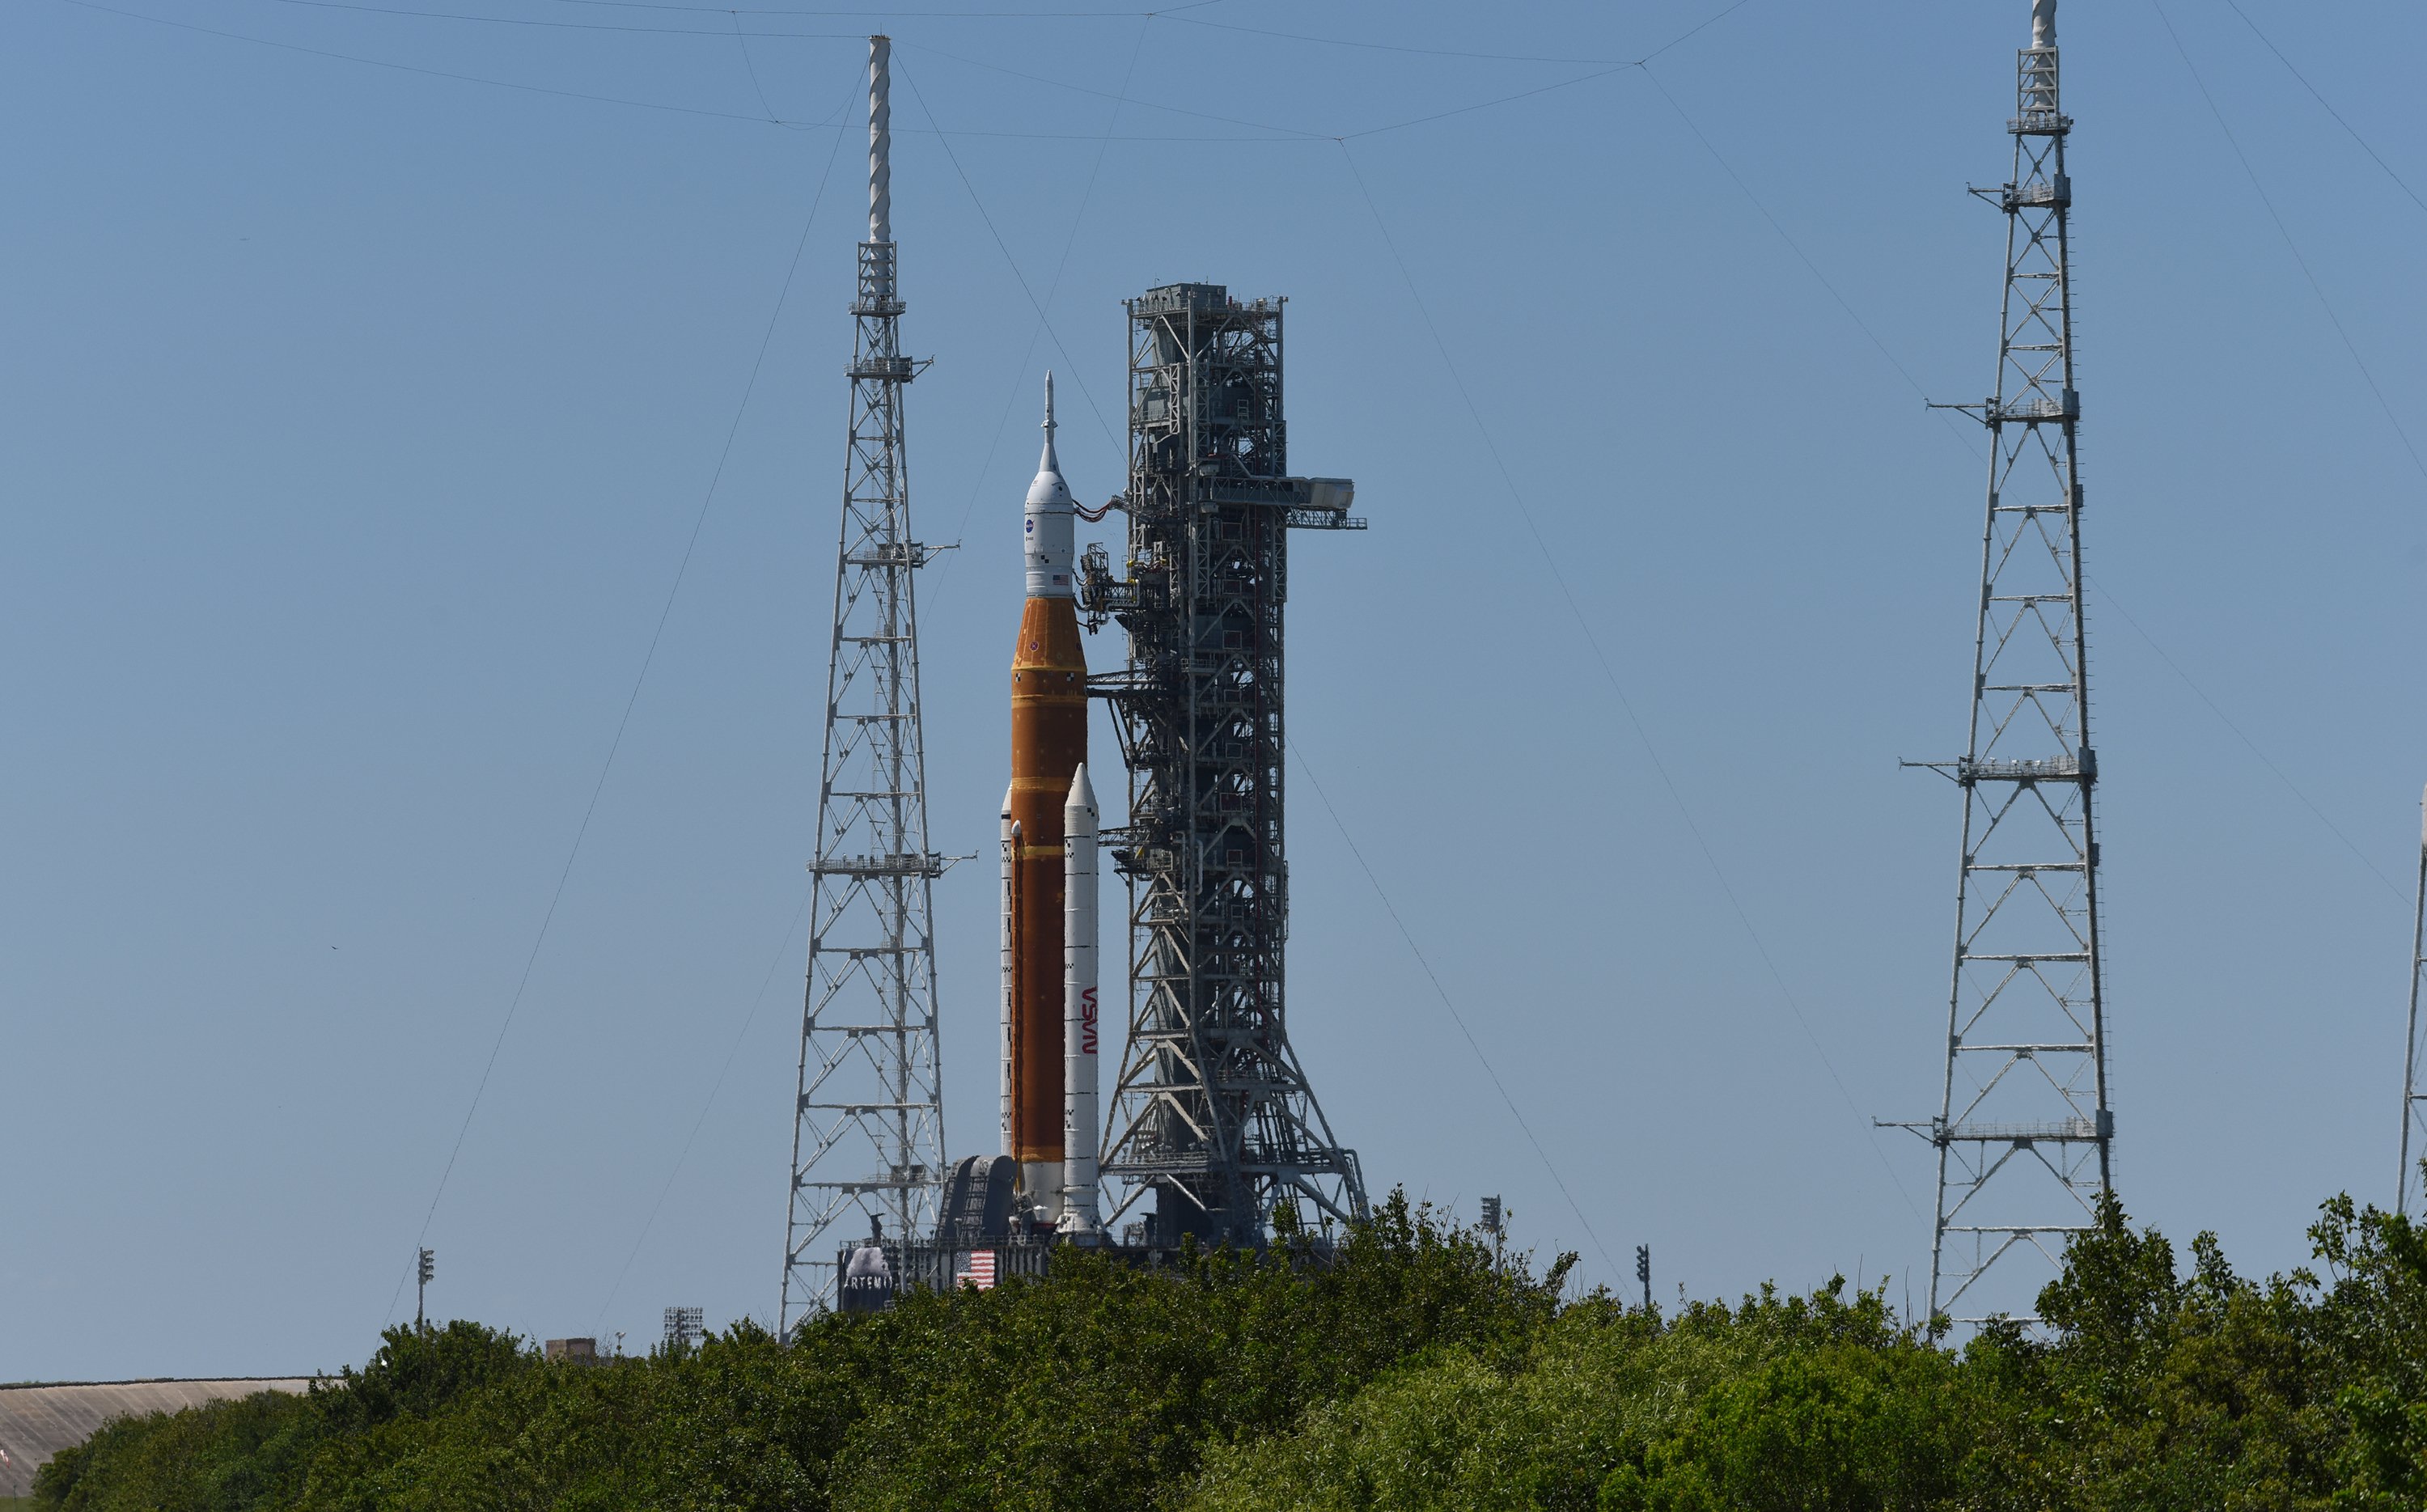 The Artemis 1 Moon rocket with the Orion capsule sits on Launch Pad 39B at the Kennedy Space Center.